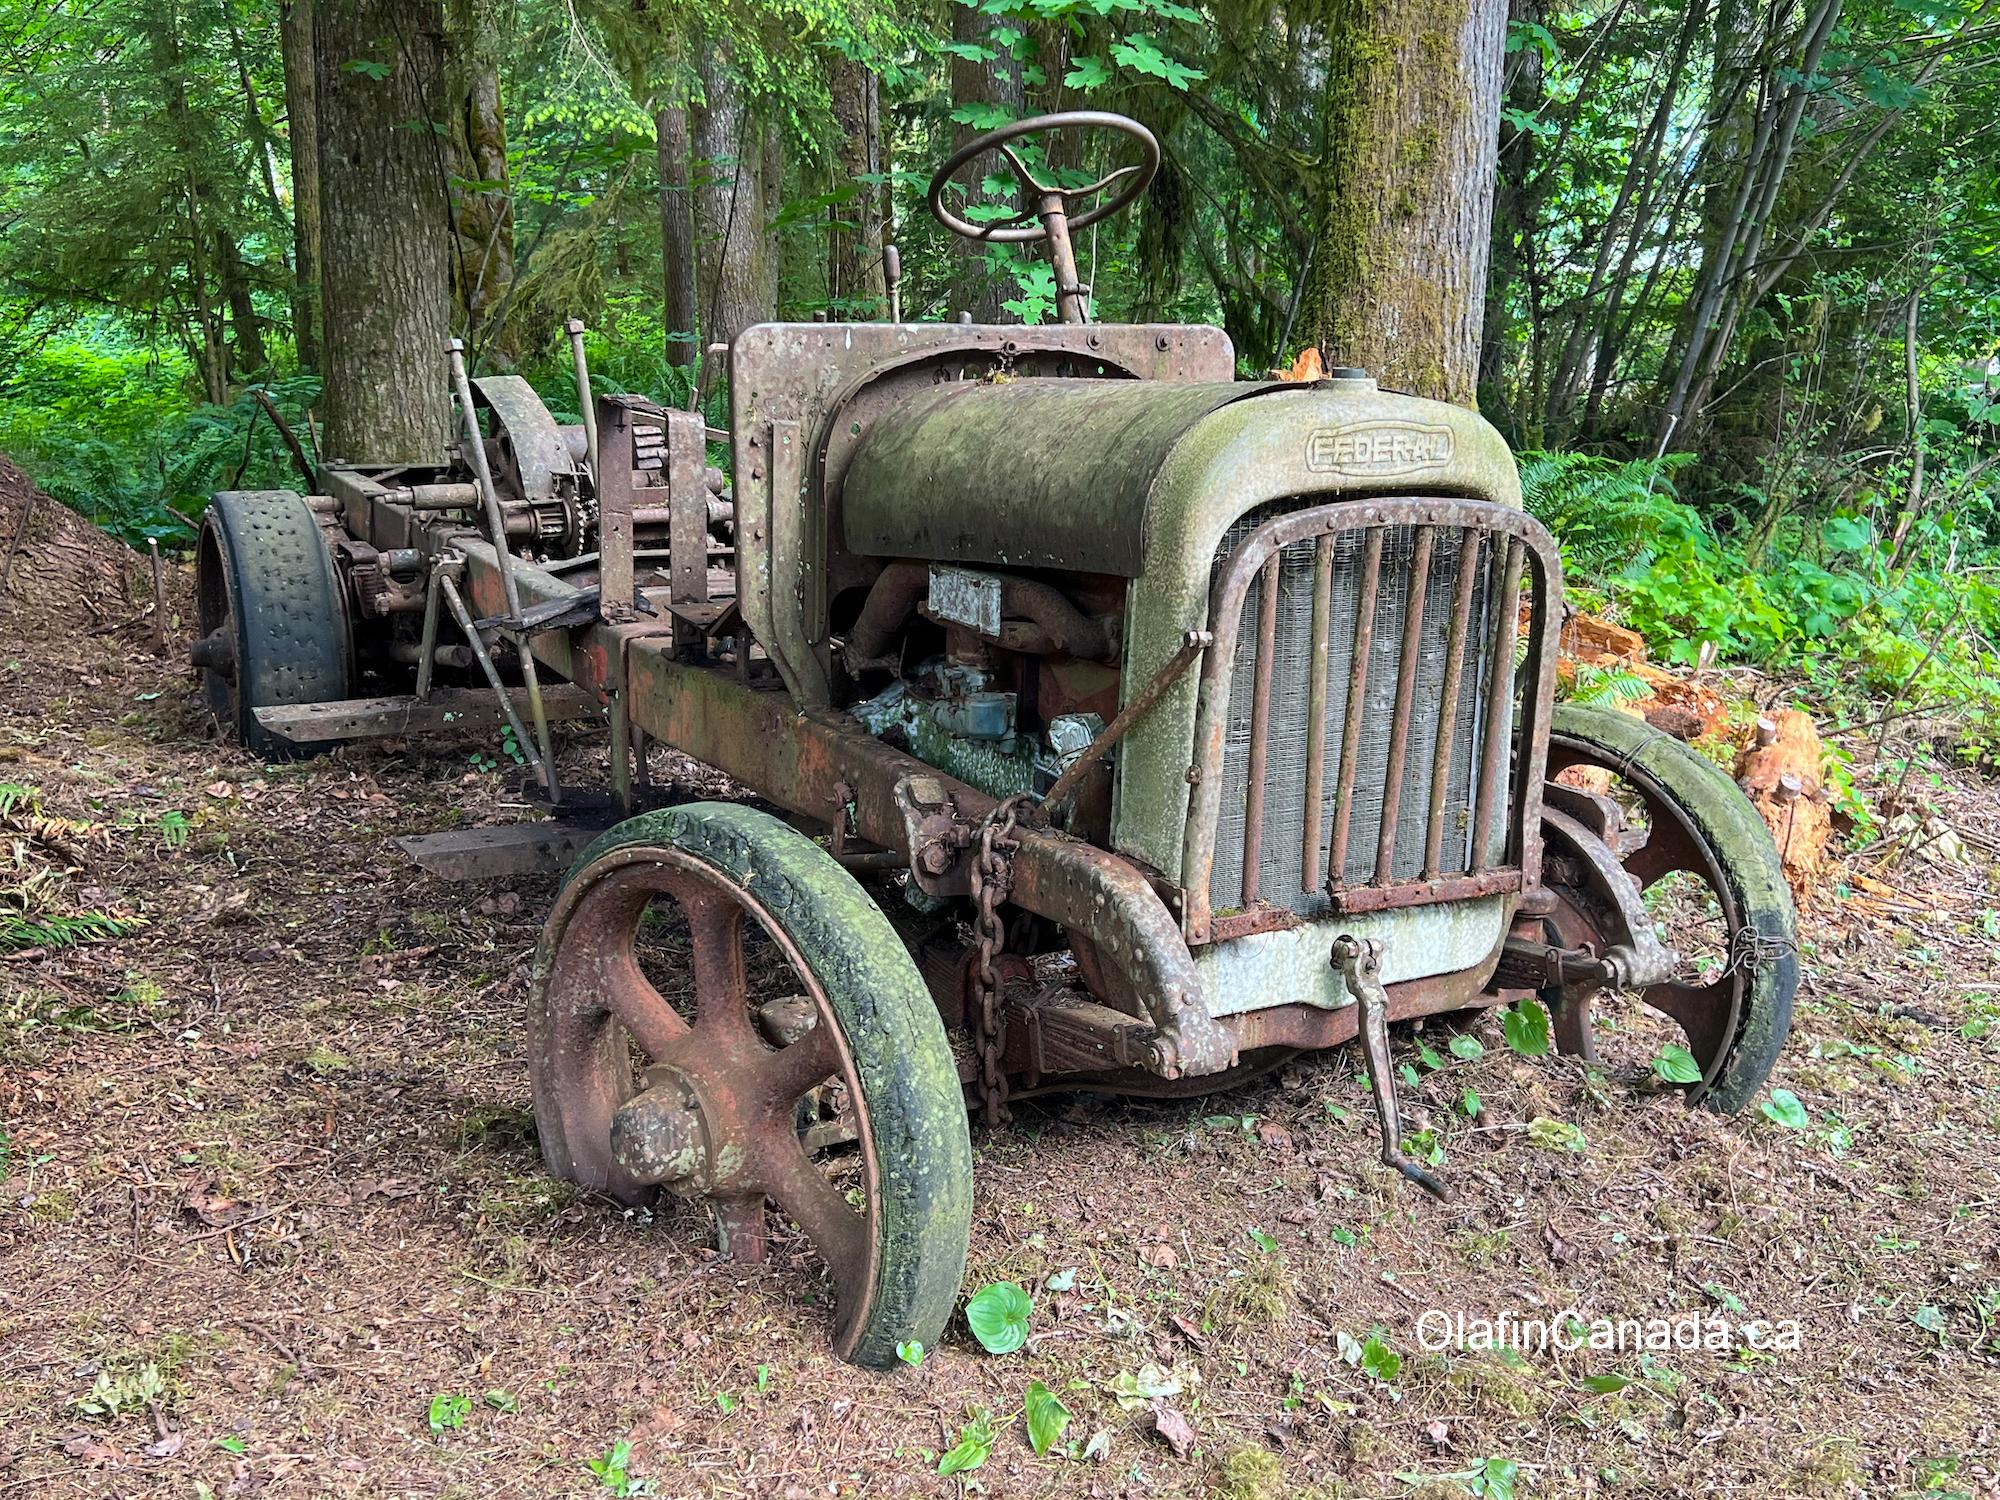 This Federal truck hauled logs out of the forests 80 years ago. Near Sayward, British Columbia